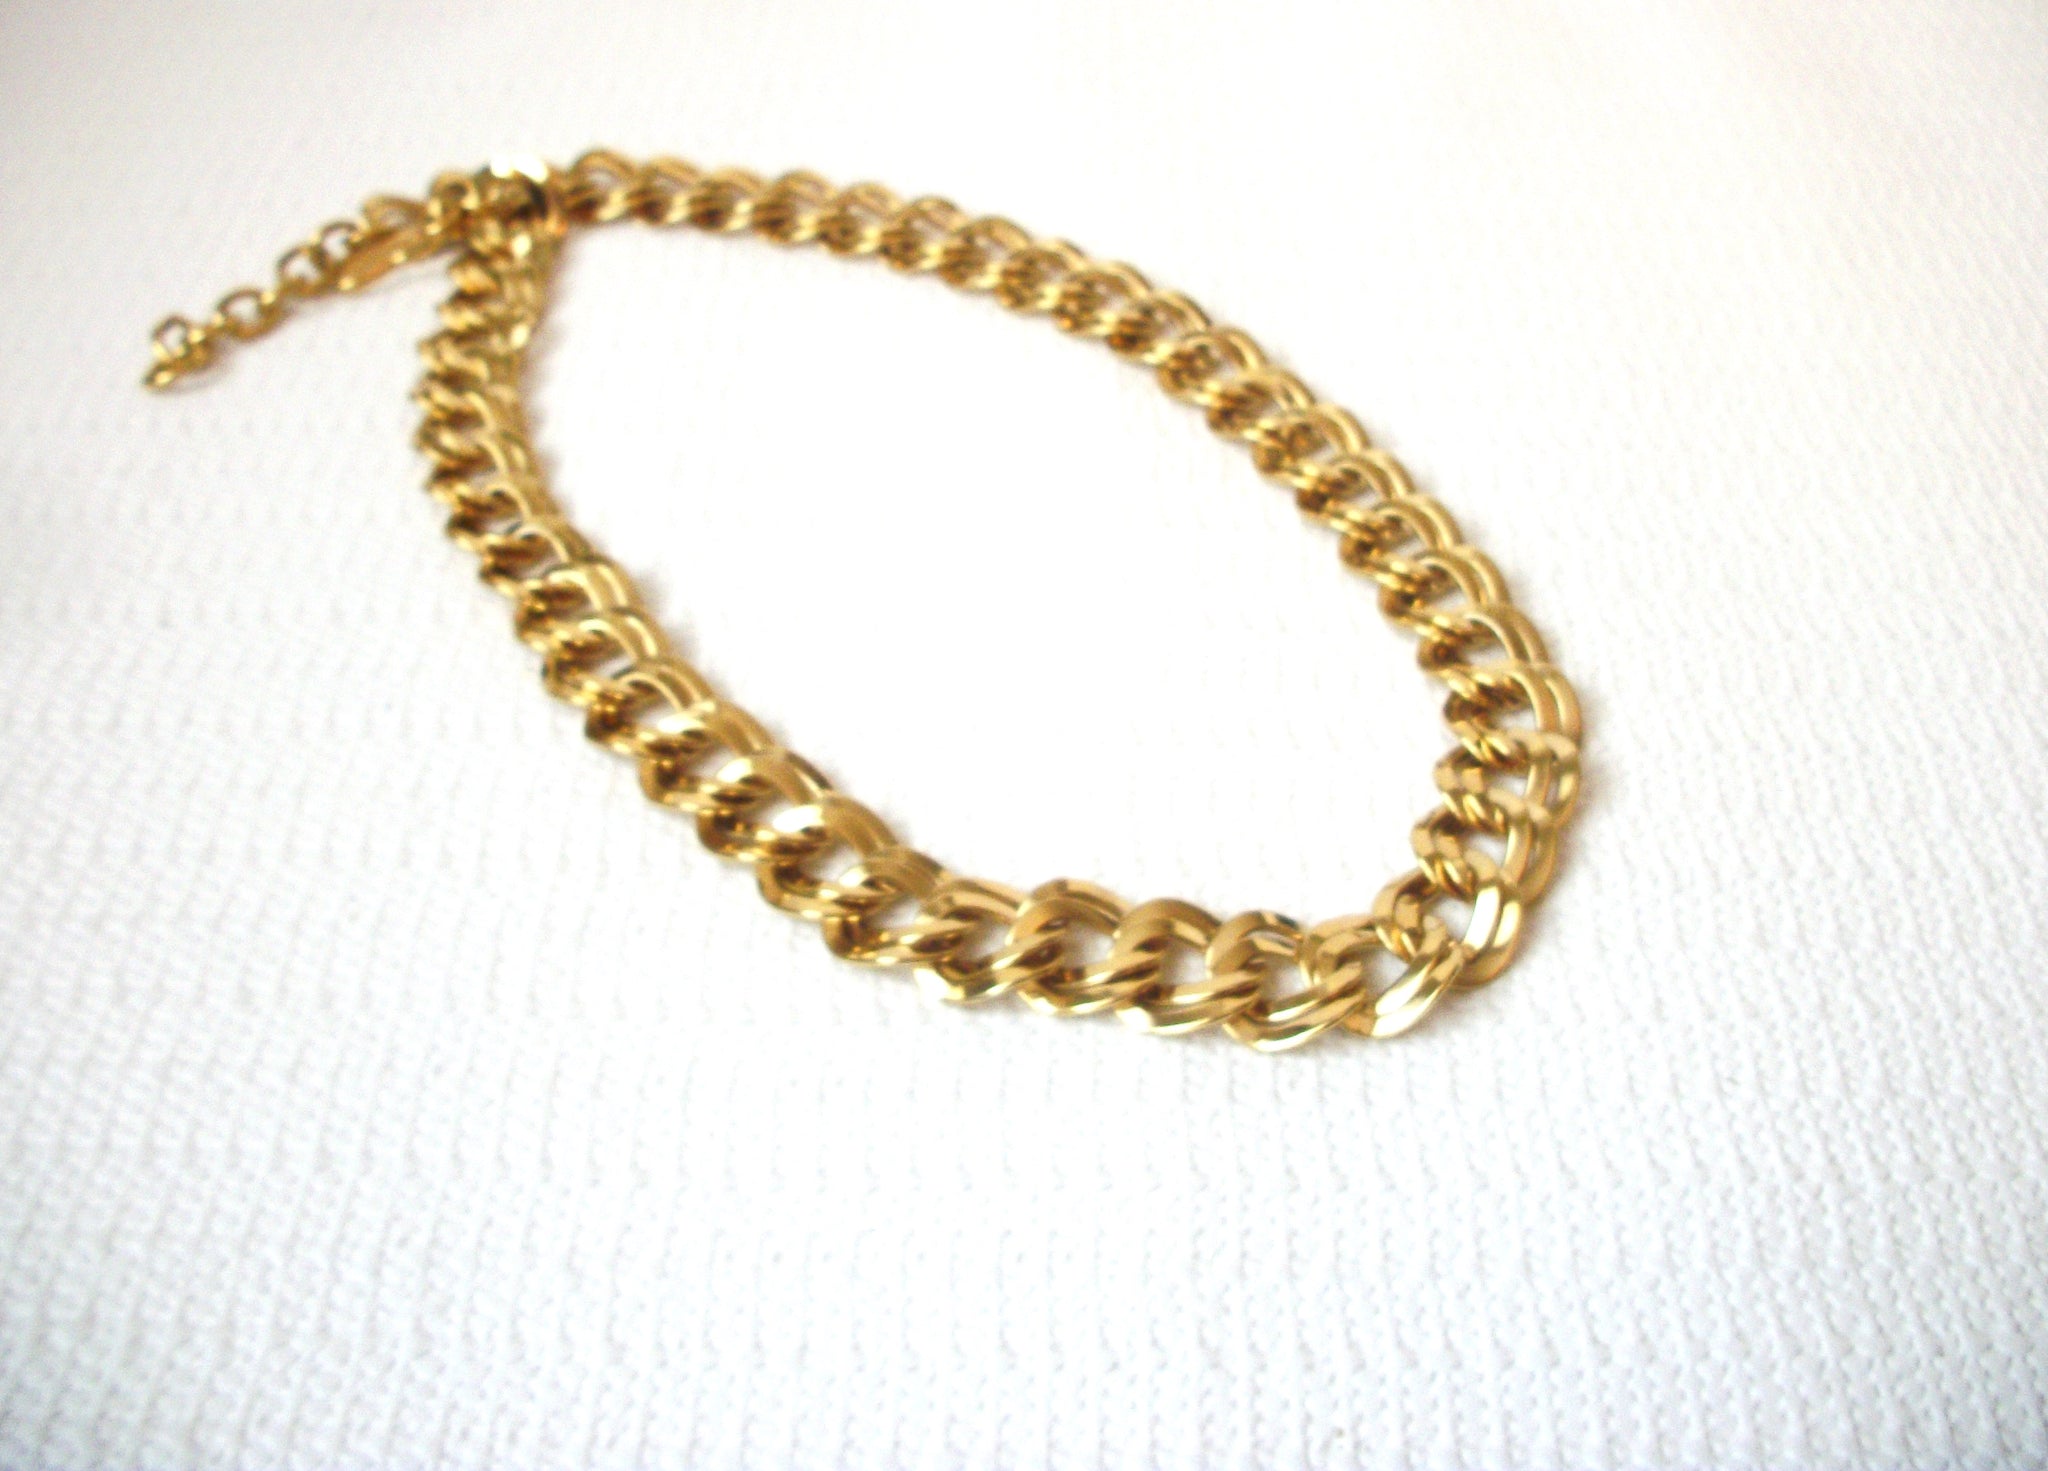 Retro Gold Toned Links Necklace 82117